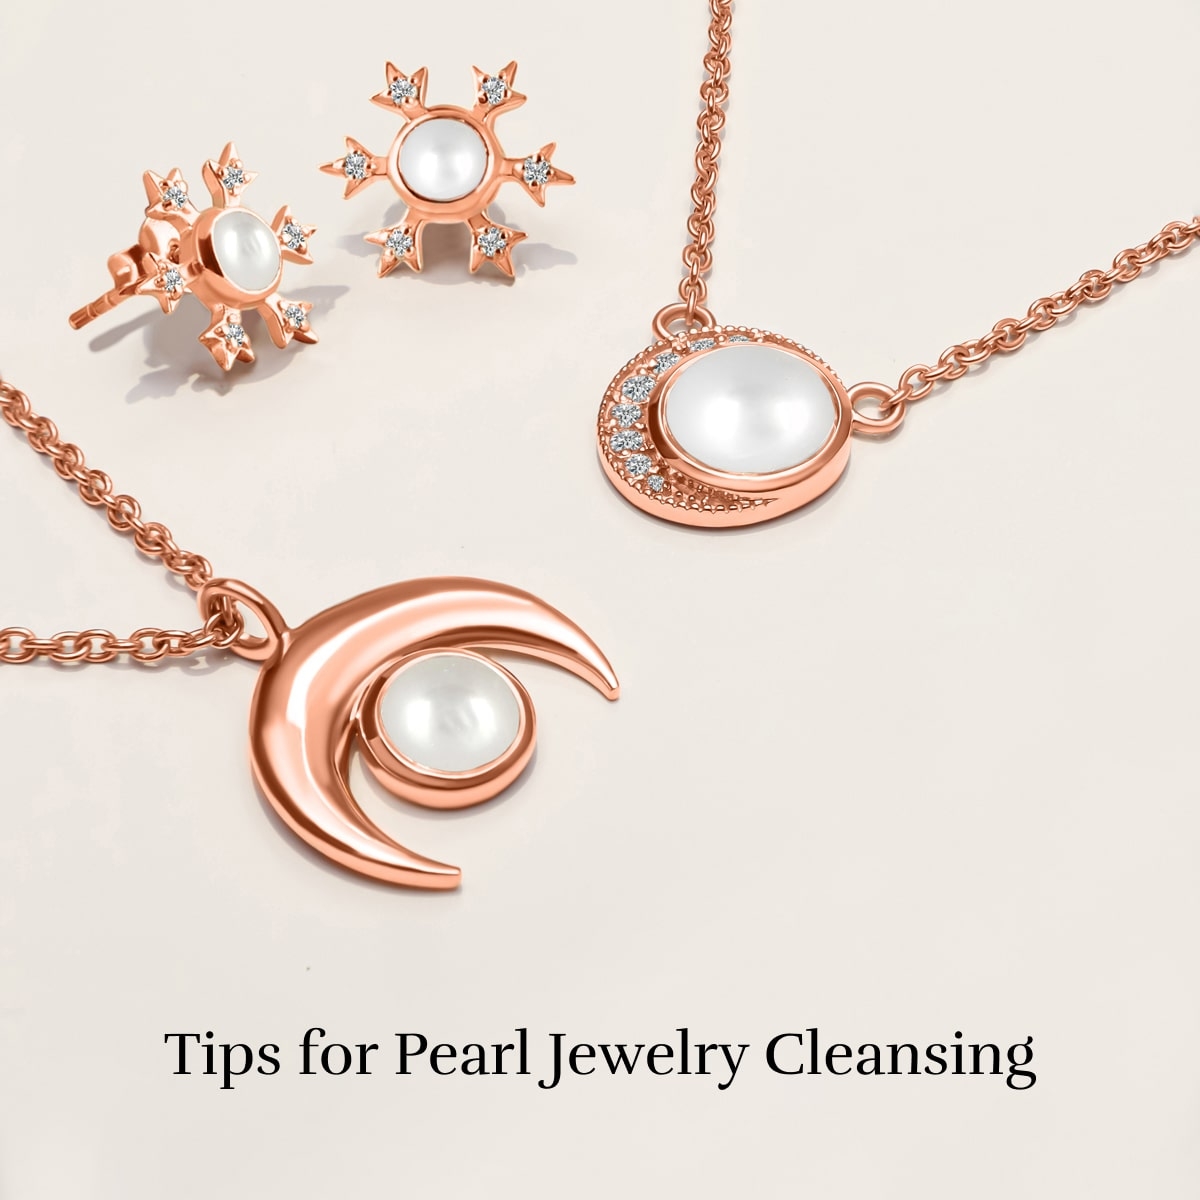 How to Cleanse Your Pearl Jewelry